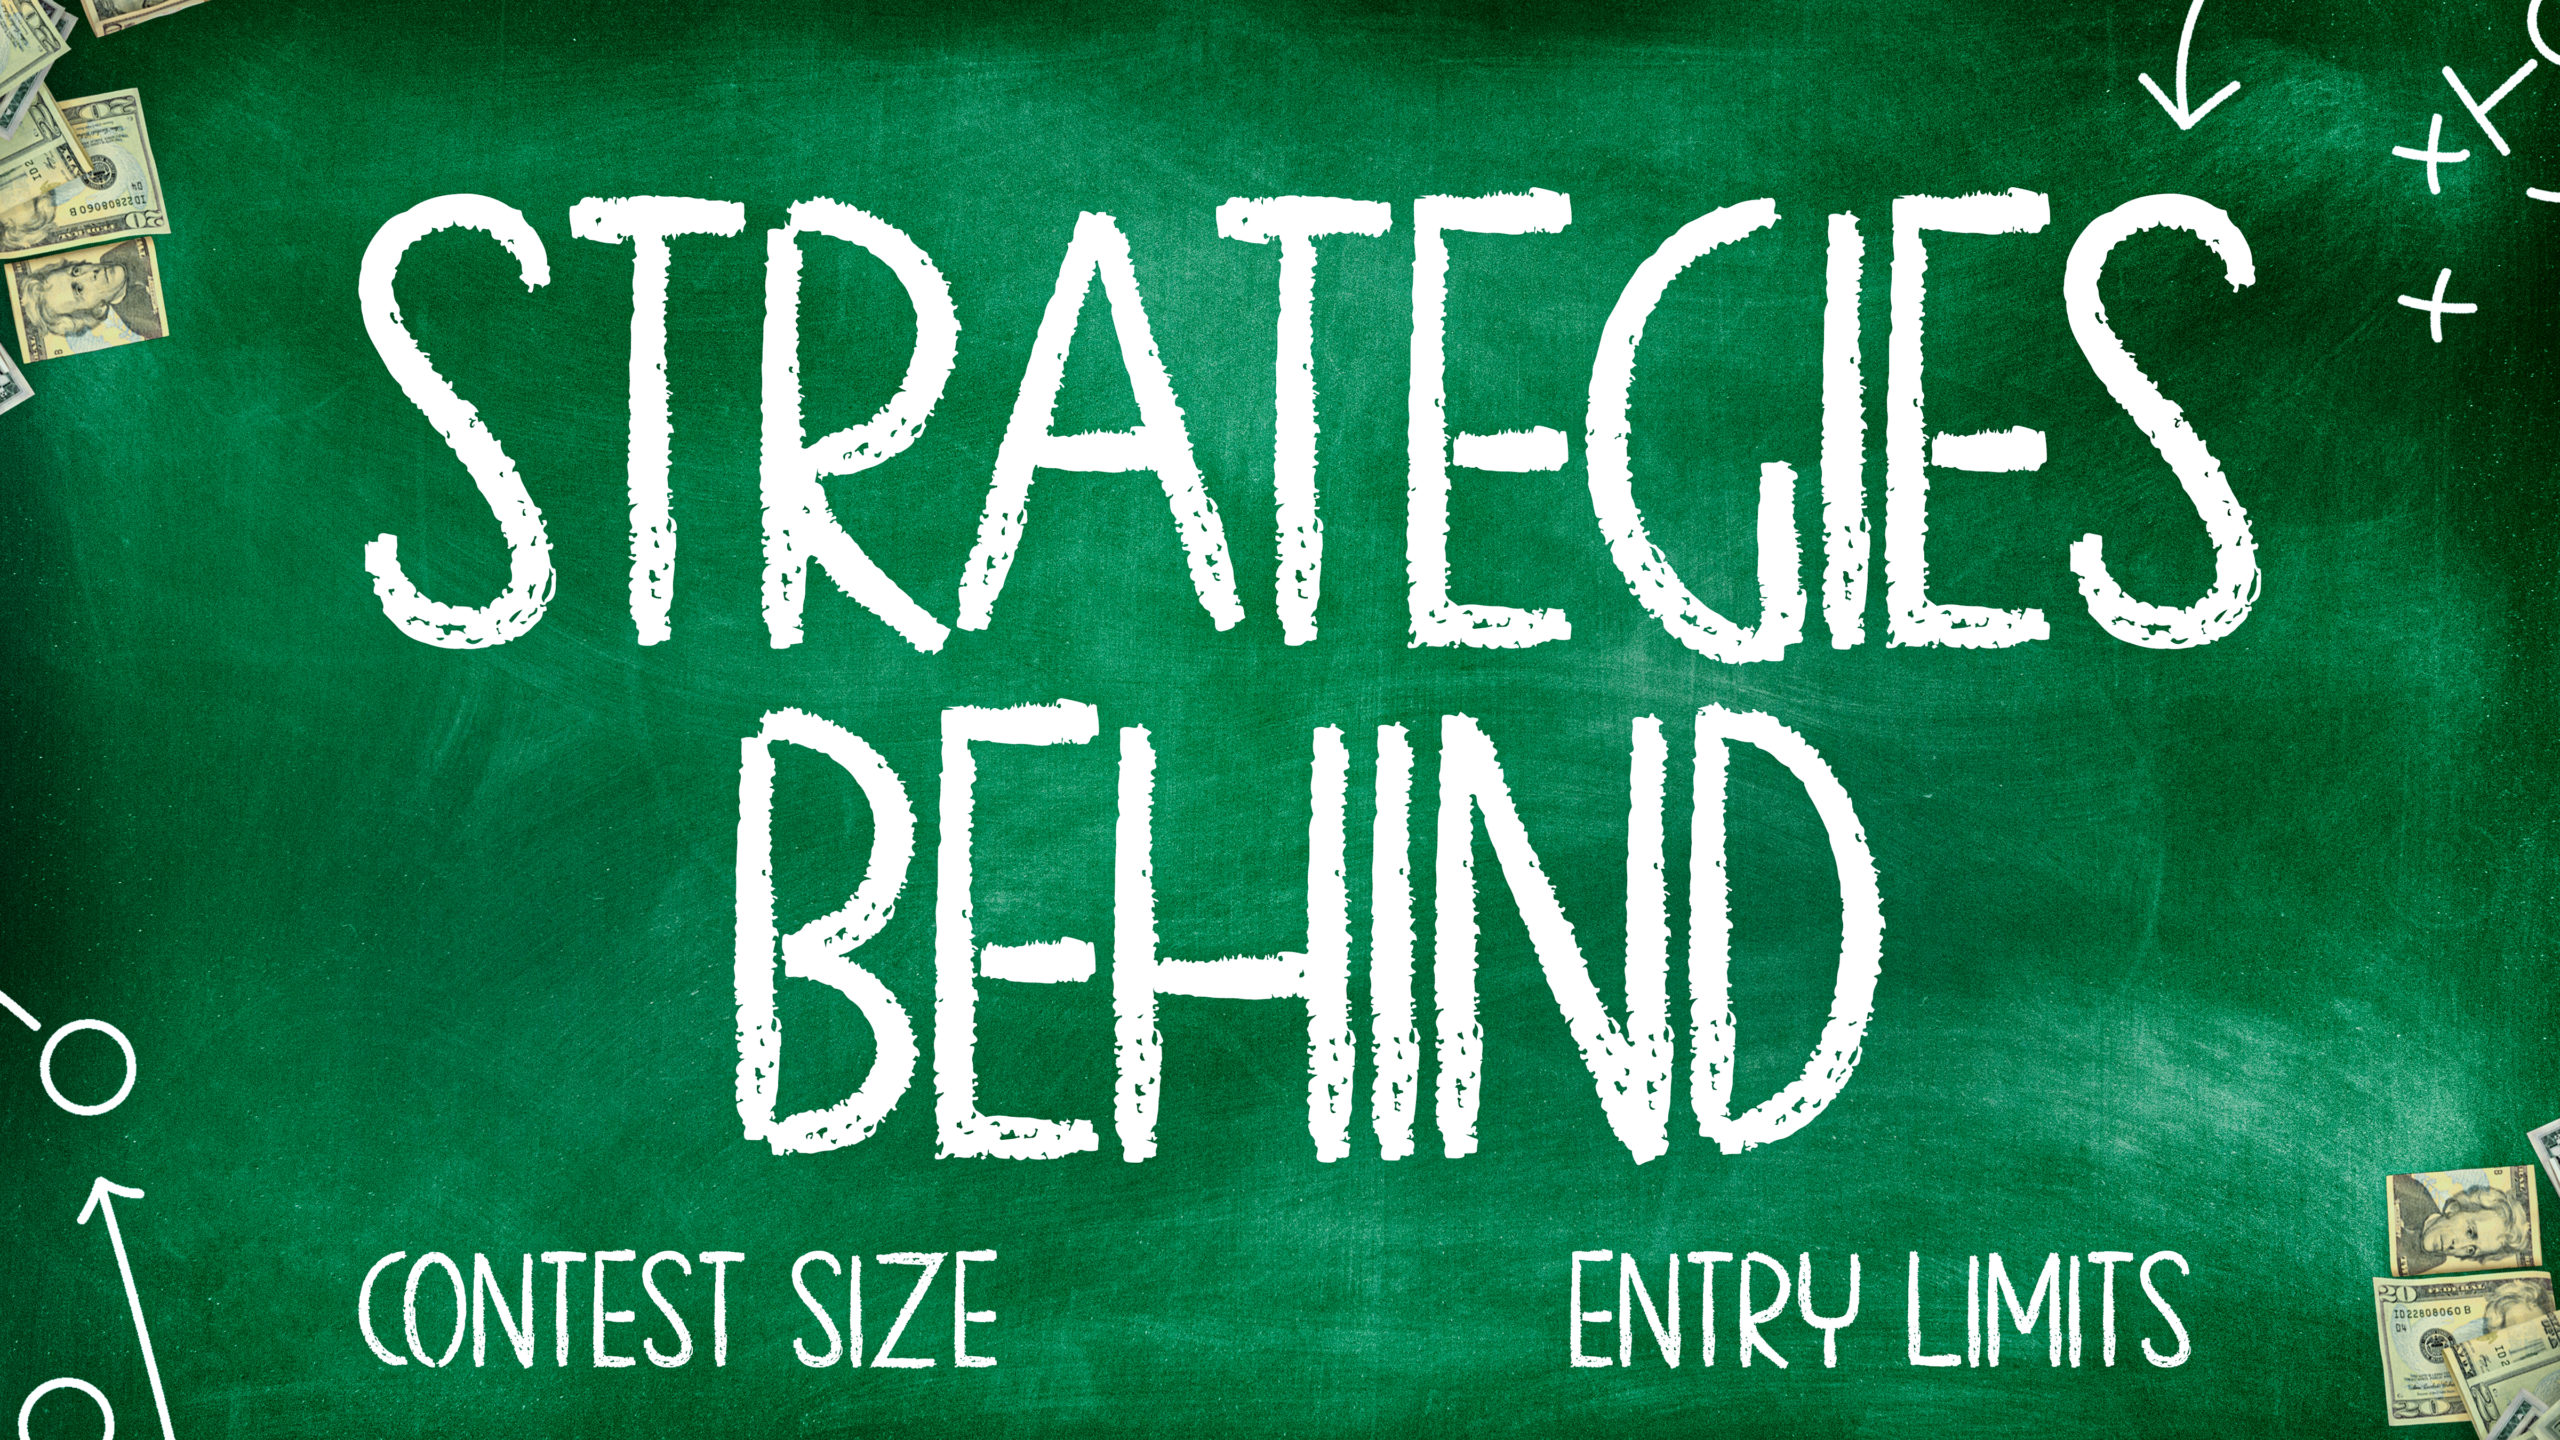 Strategies behind Contest Size and Entry Limits